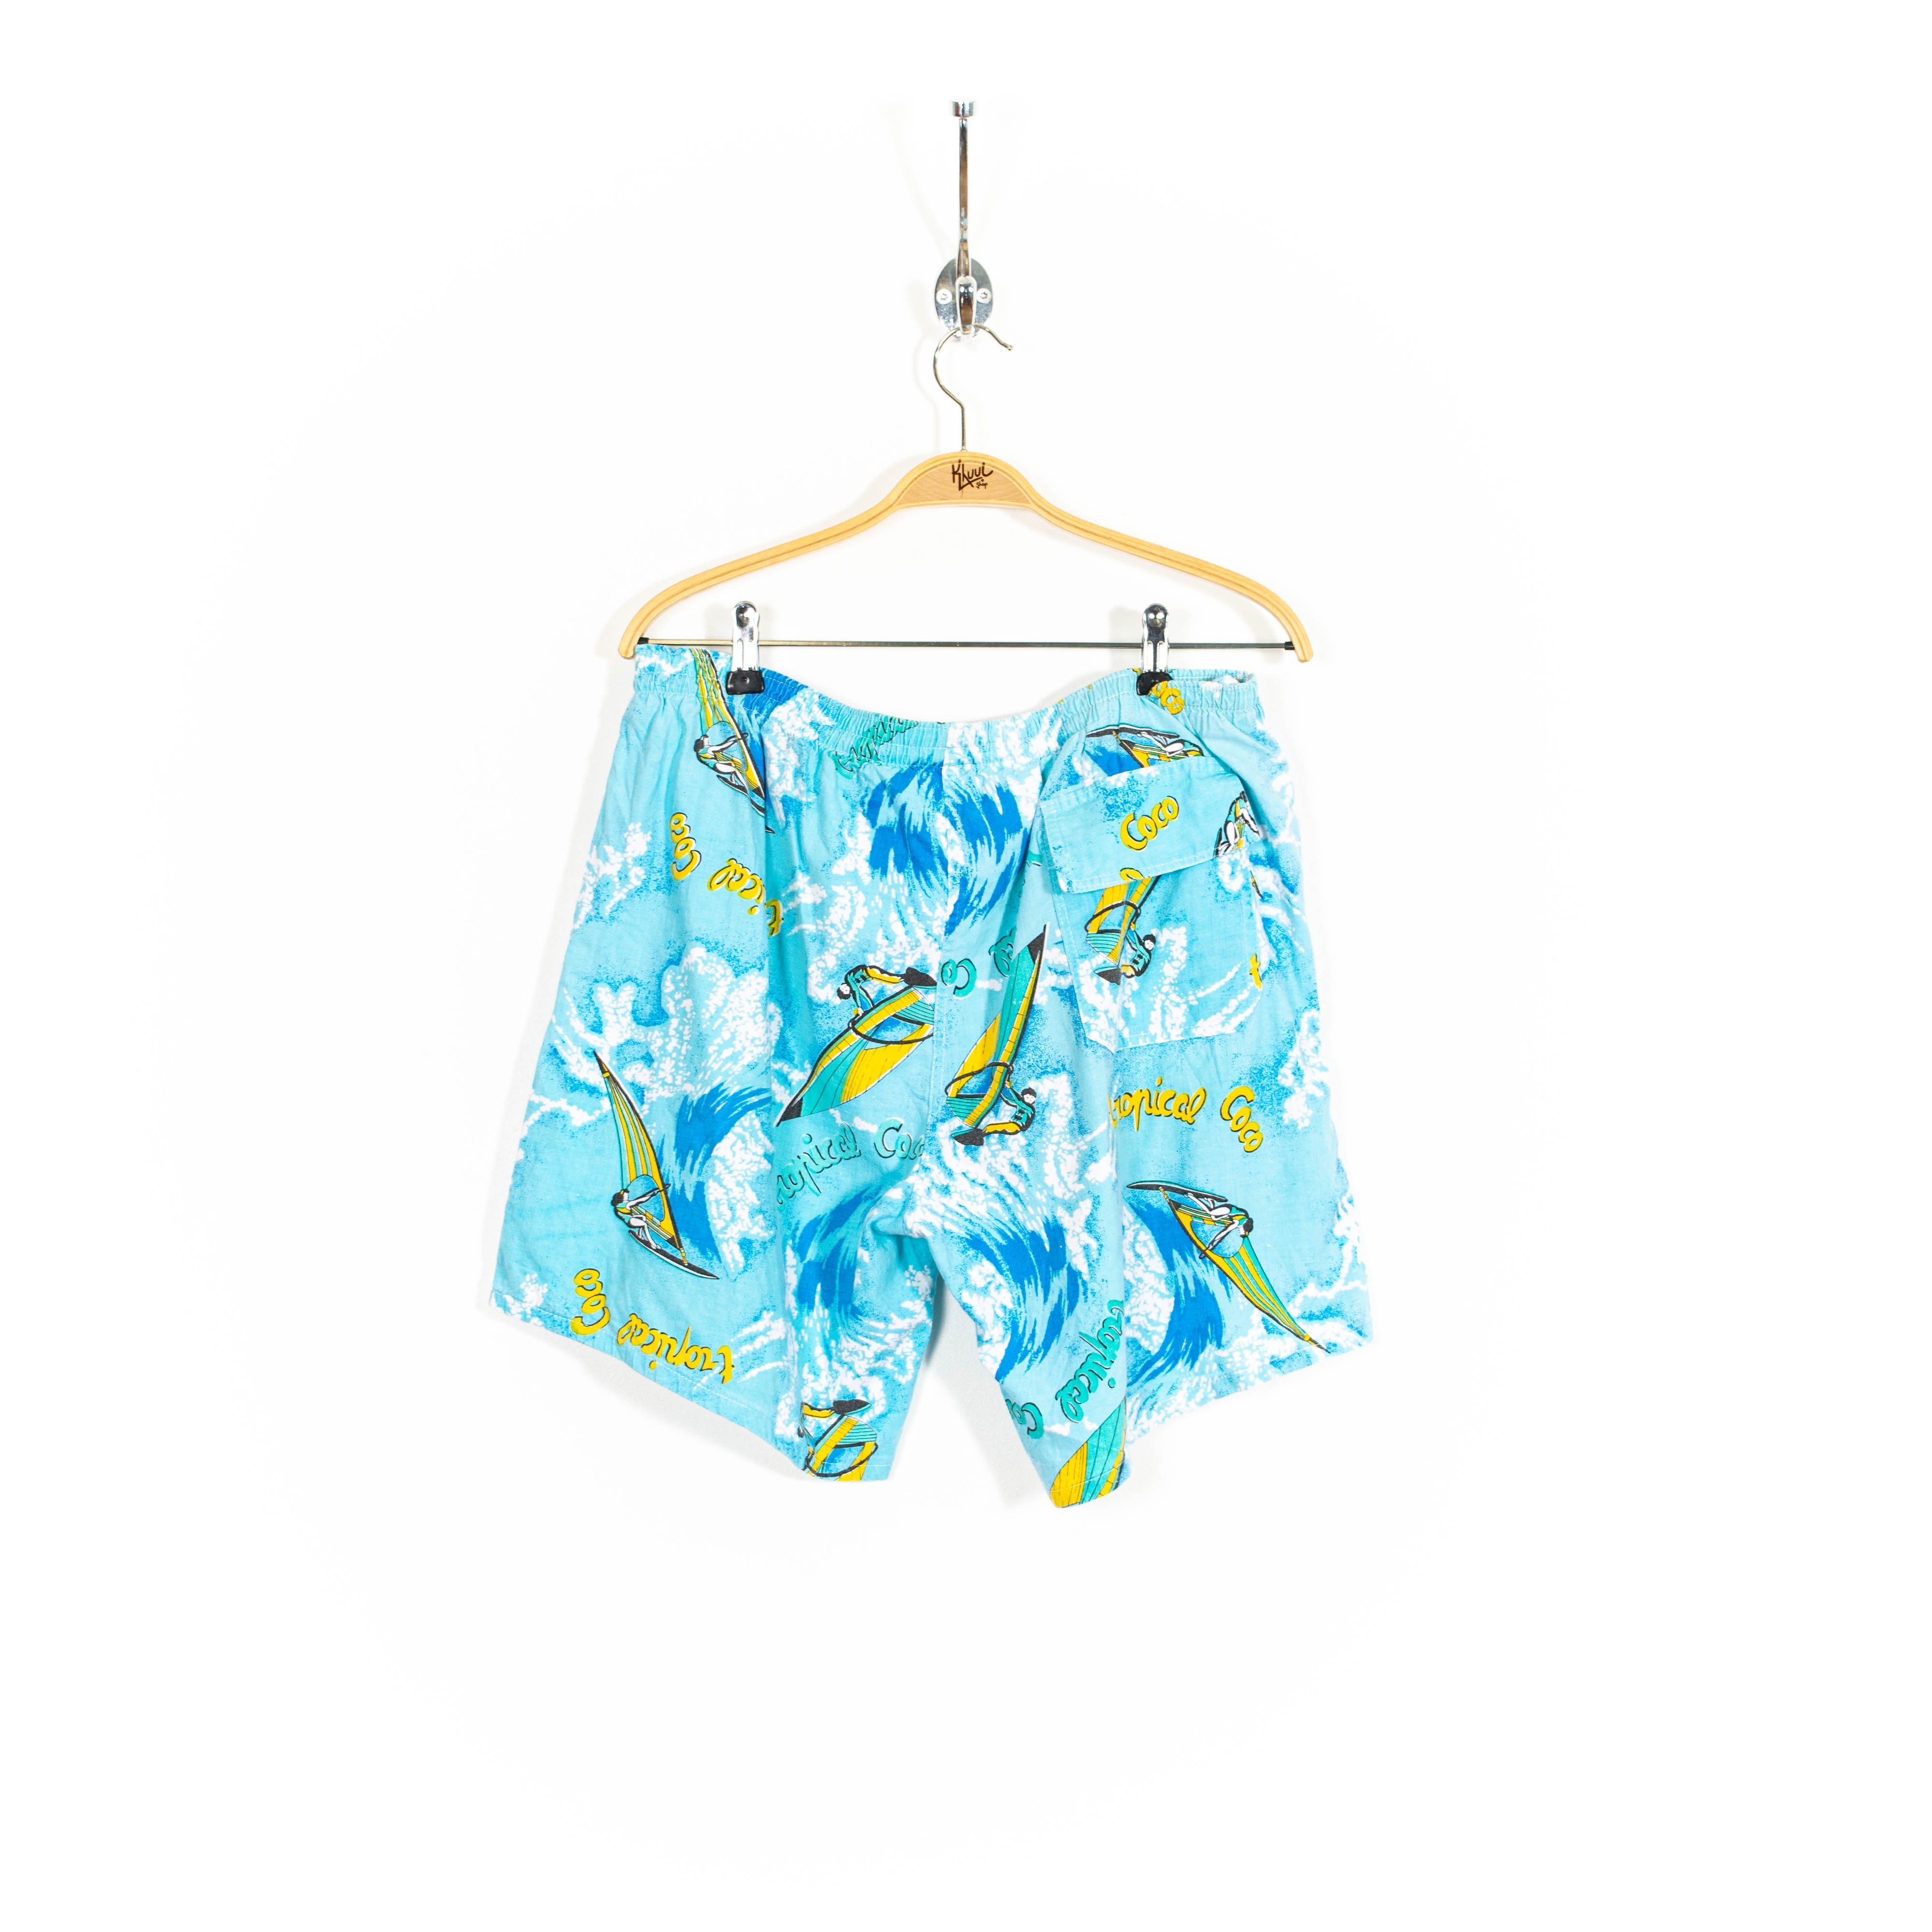 Multicolor Surfing Print Swimming Shorts Mens US31